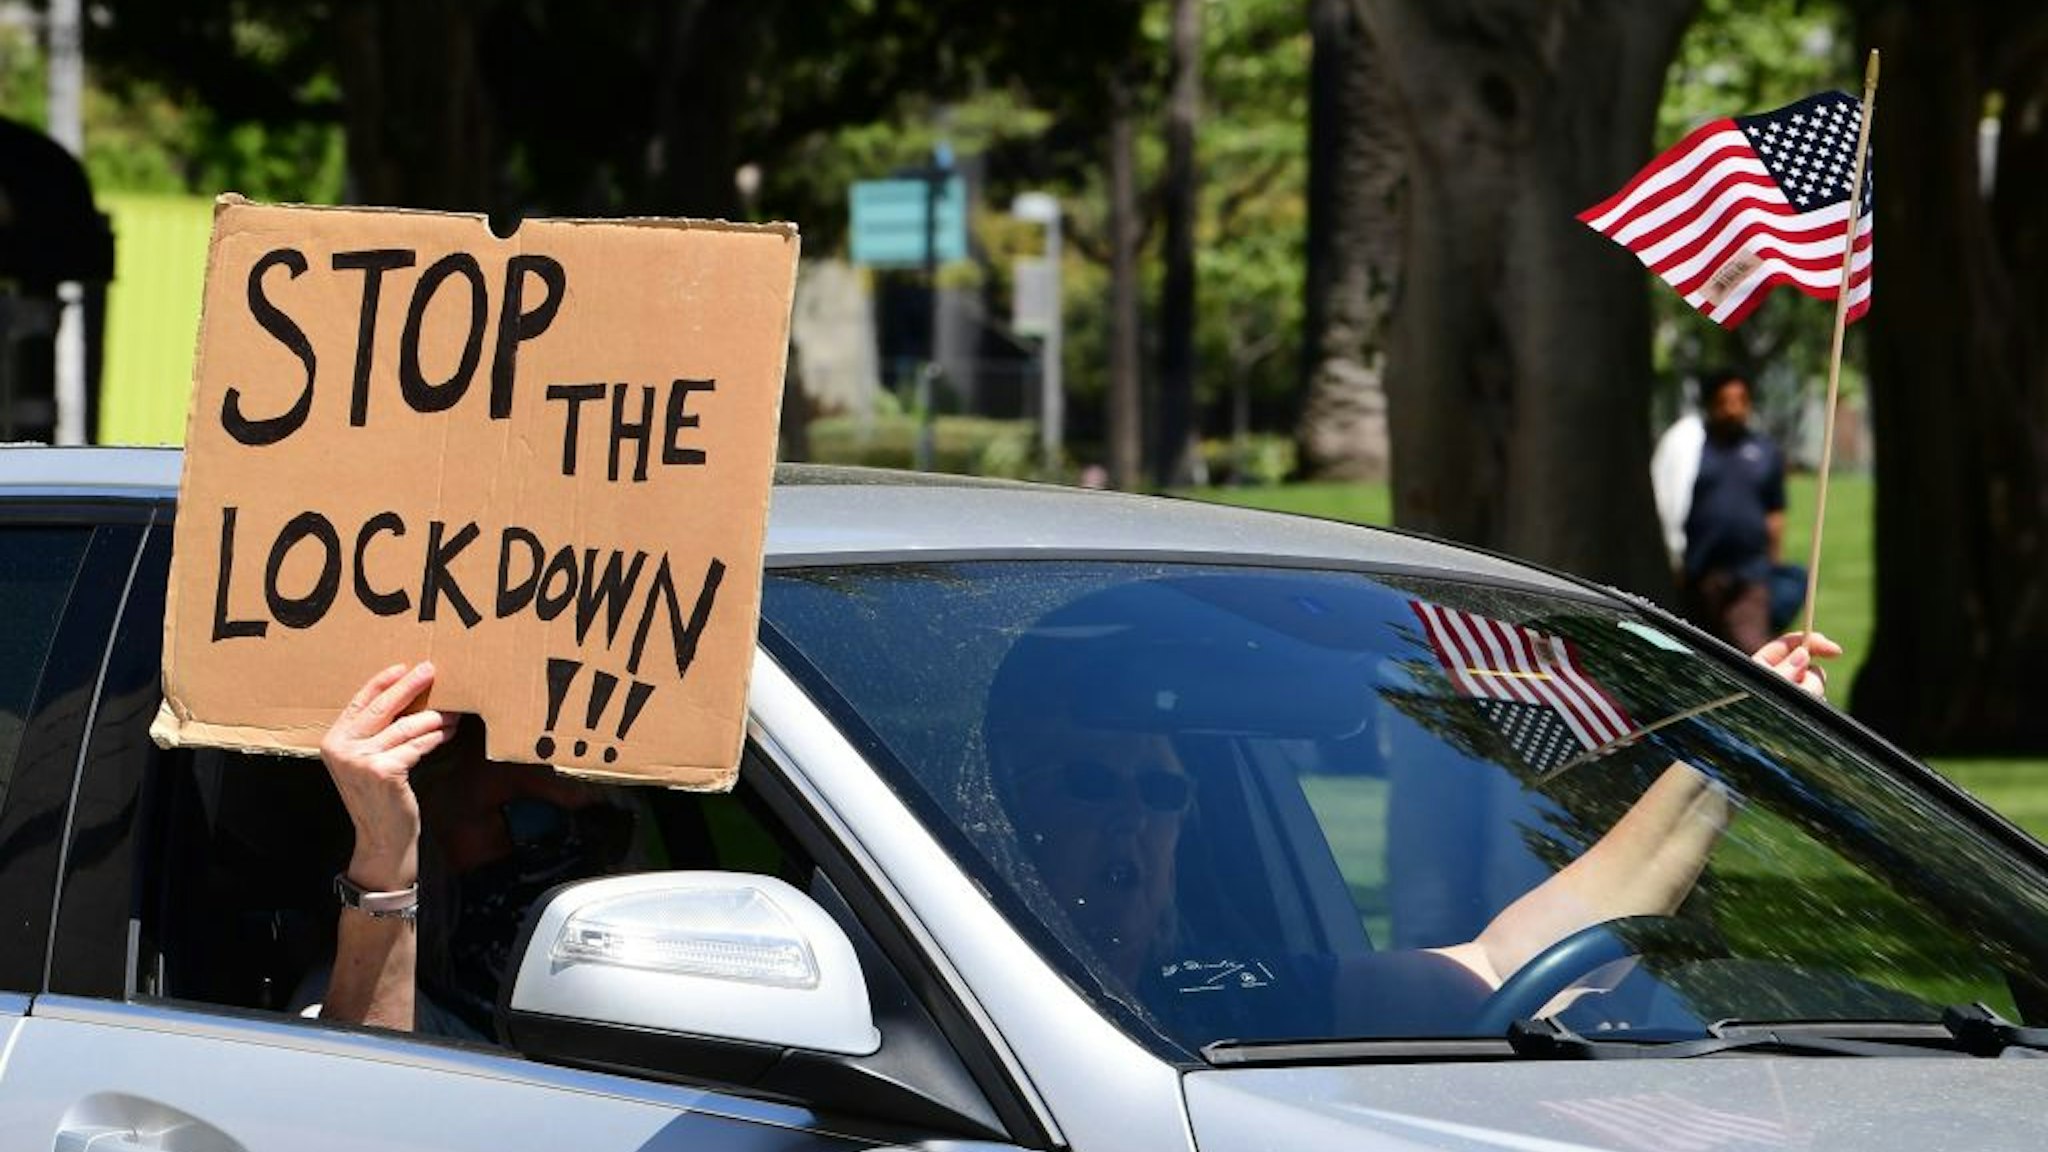 Protesters display placards and flags from their vehicle demanding the "Stay at Home" order to be lifted and the government to re-open the state during an "Open California" rally in downtown Los Angeles, on April 22, 2020. - Over the past week there have been scattered protests in several US states against confinement measures, from New Hampshire, Maryland and Pennsylvania to Texas and California. (Photo by Frederic J. BROWN / AFP) (Photo by FREDERIC J. BROWN/AFP via Getty Images)